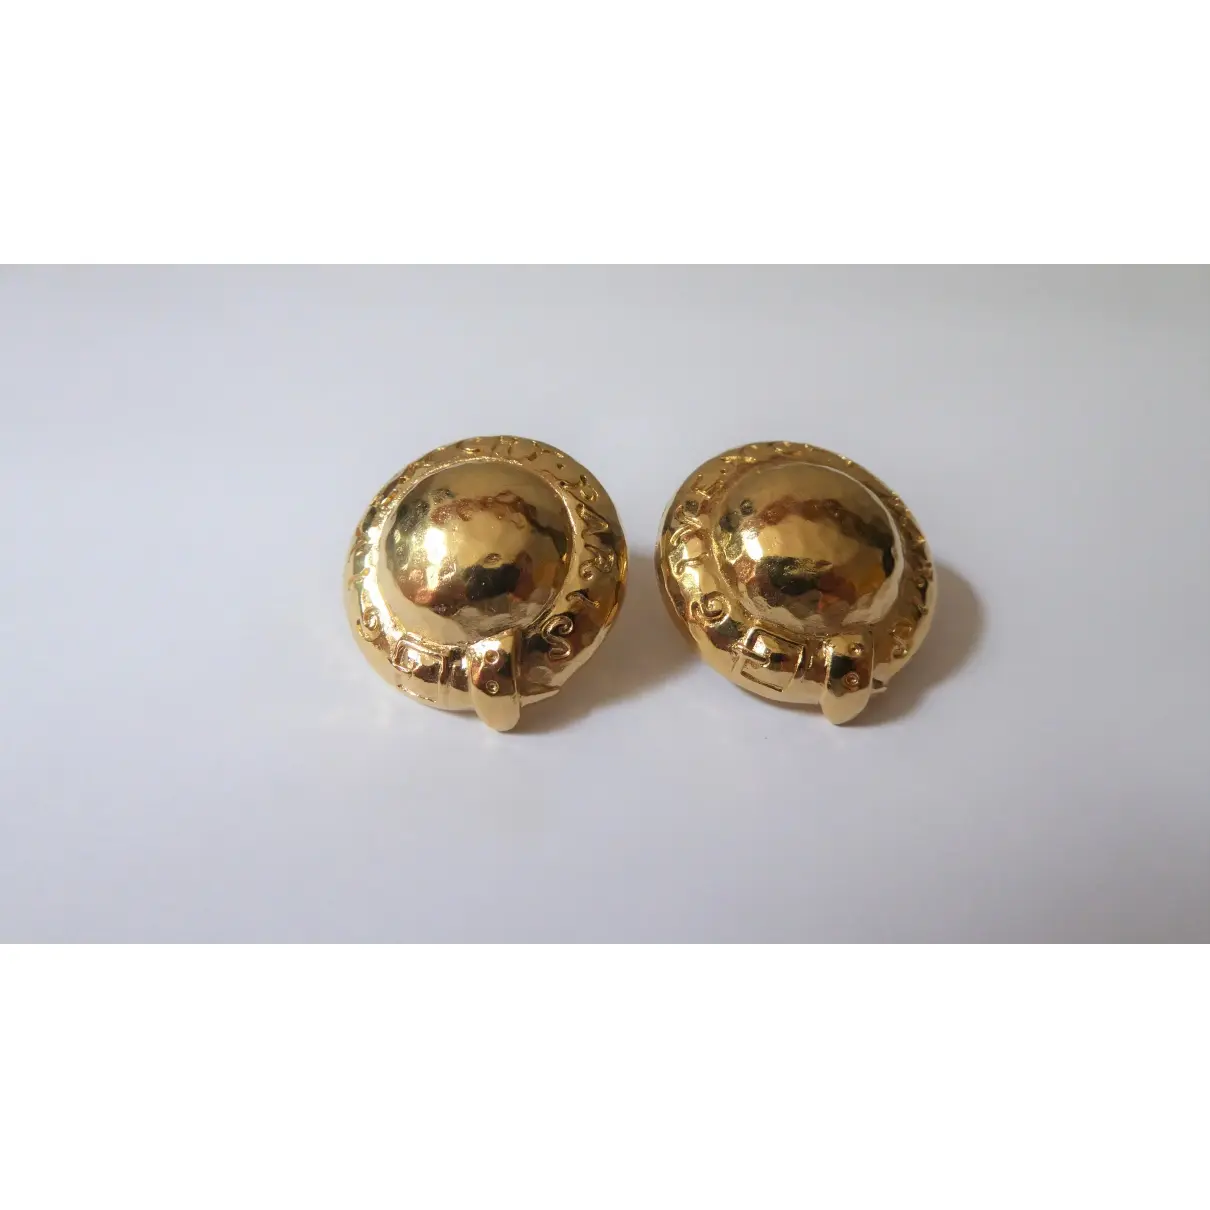 Givenchy Earrings for sale - Vintage